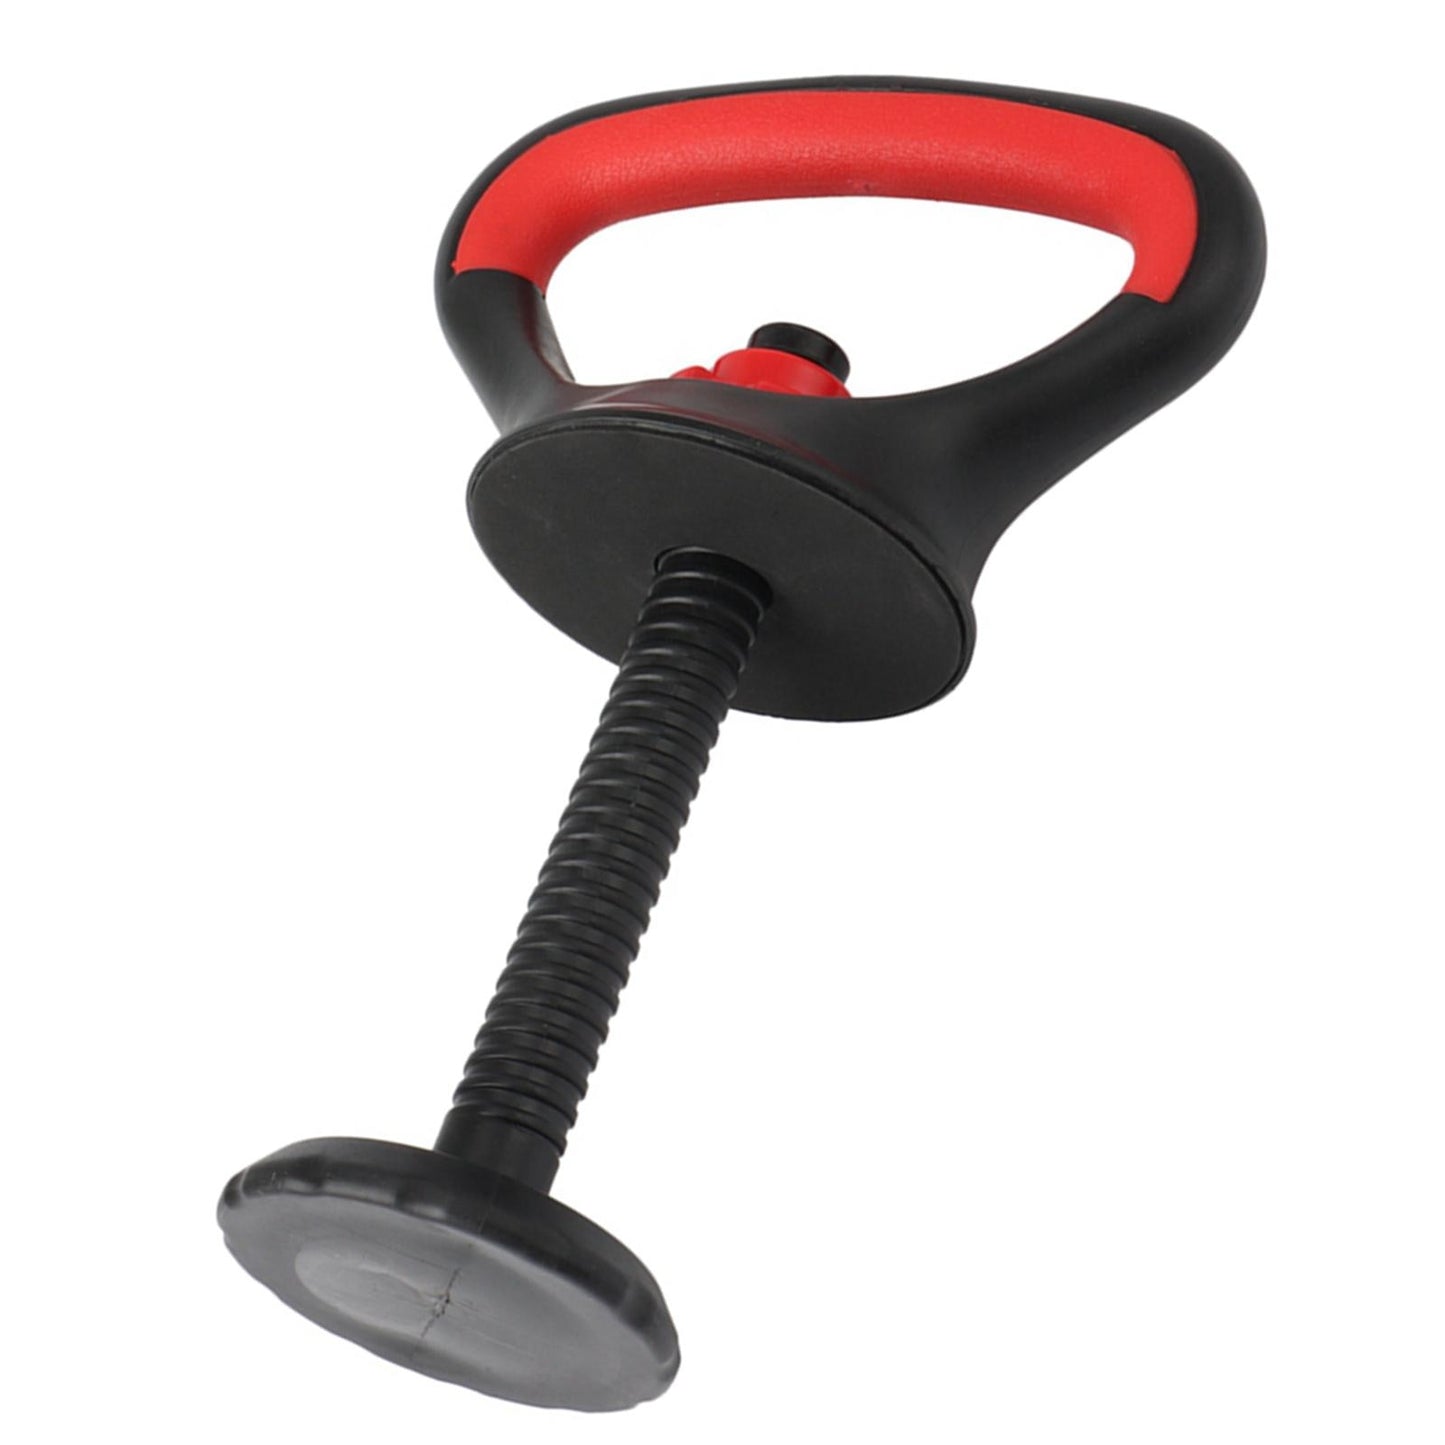 Metal Kettlebell Handle For Weight Plates